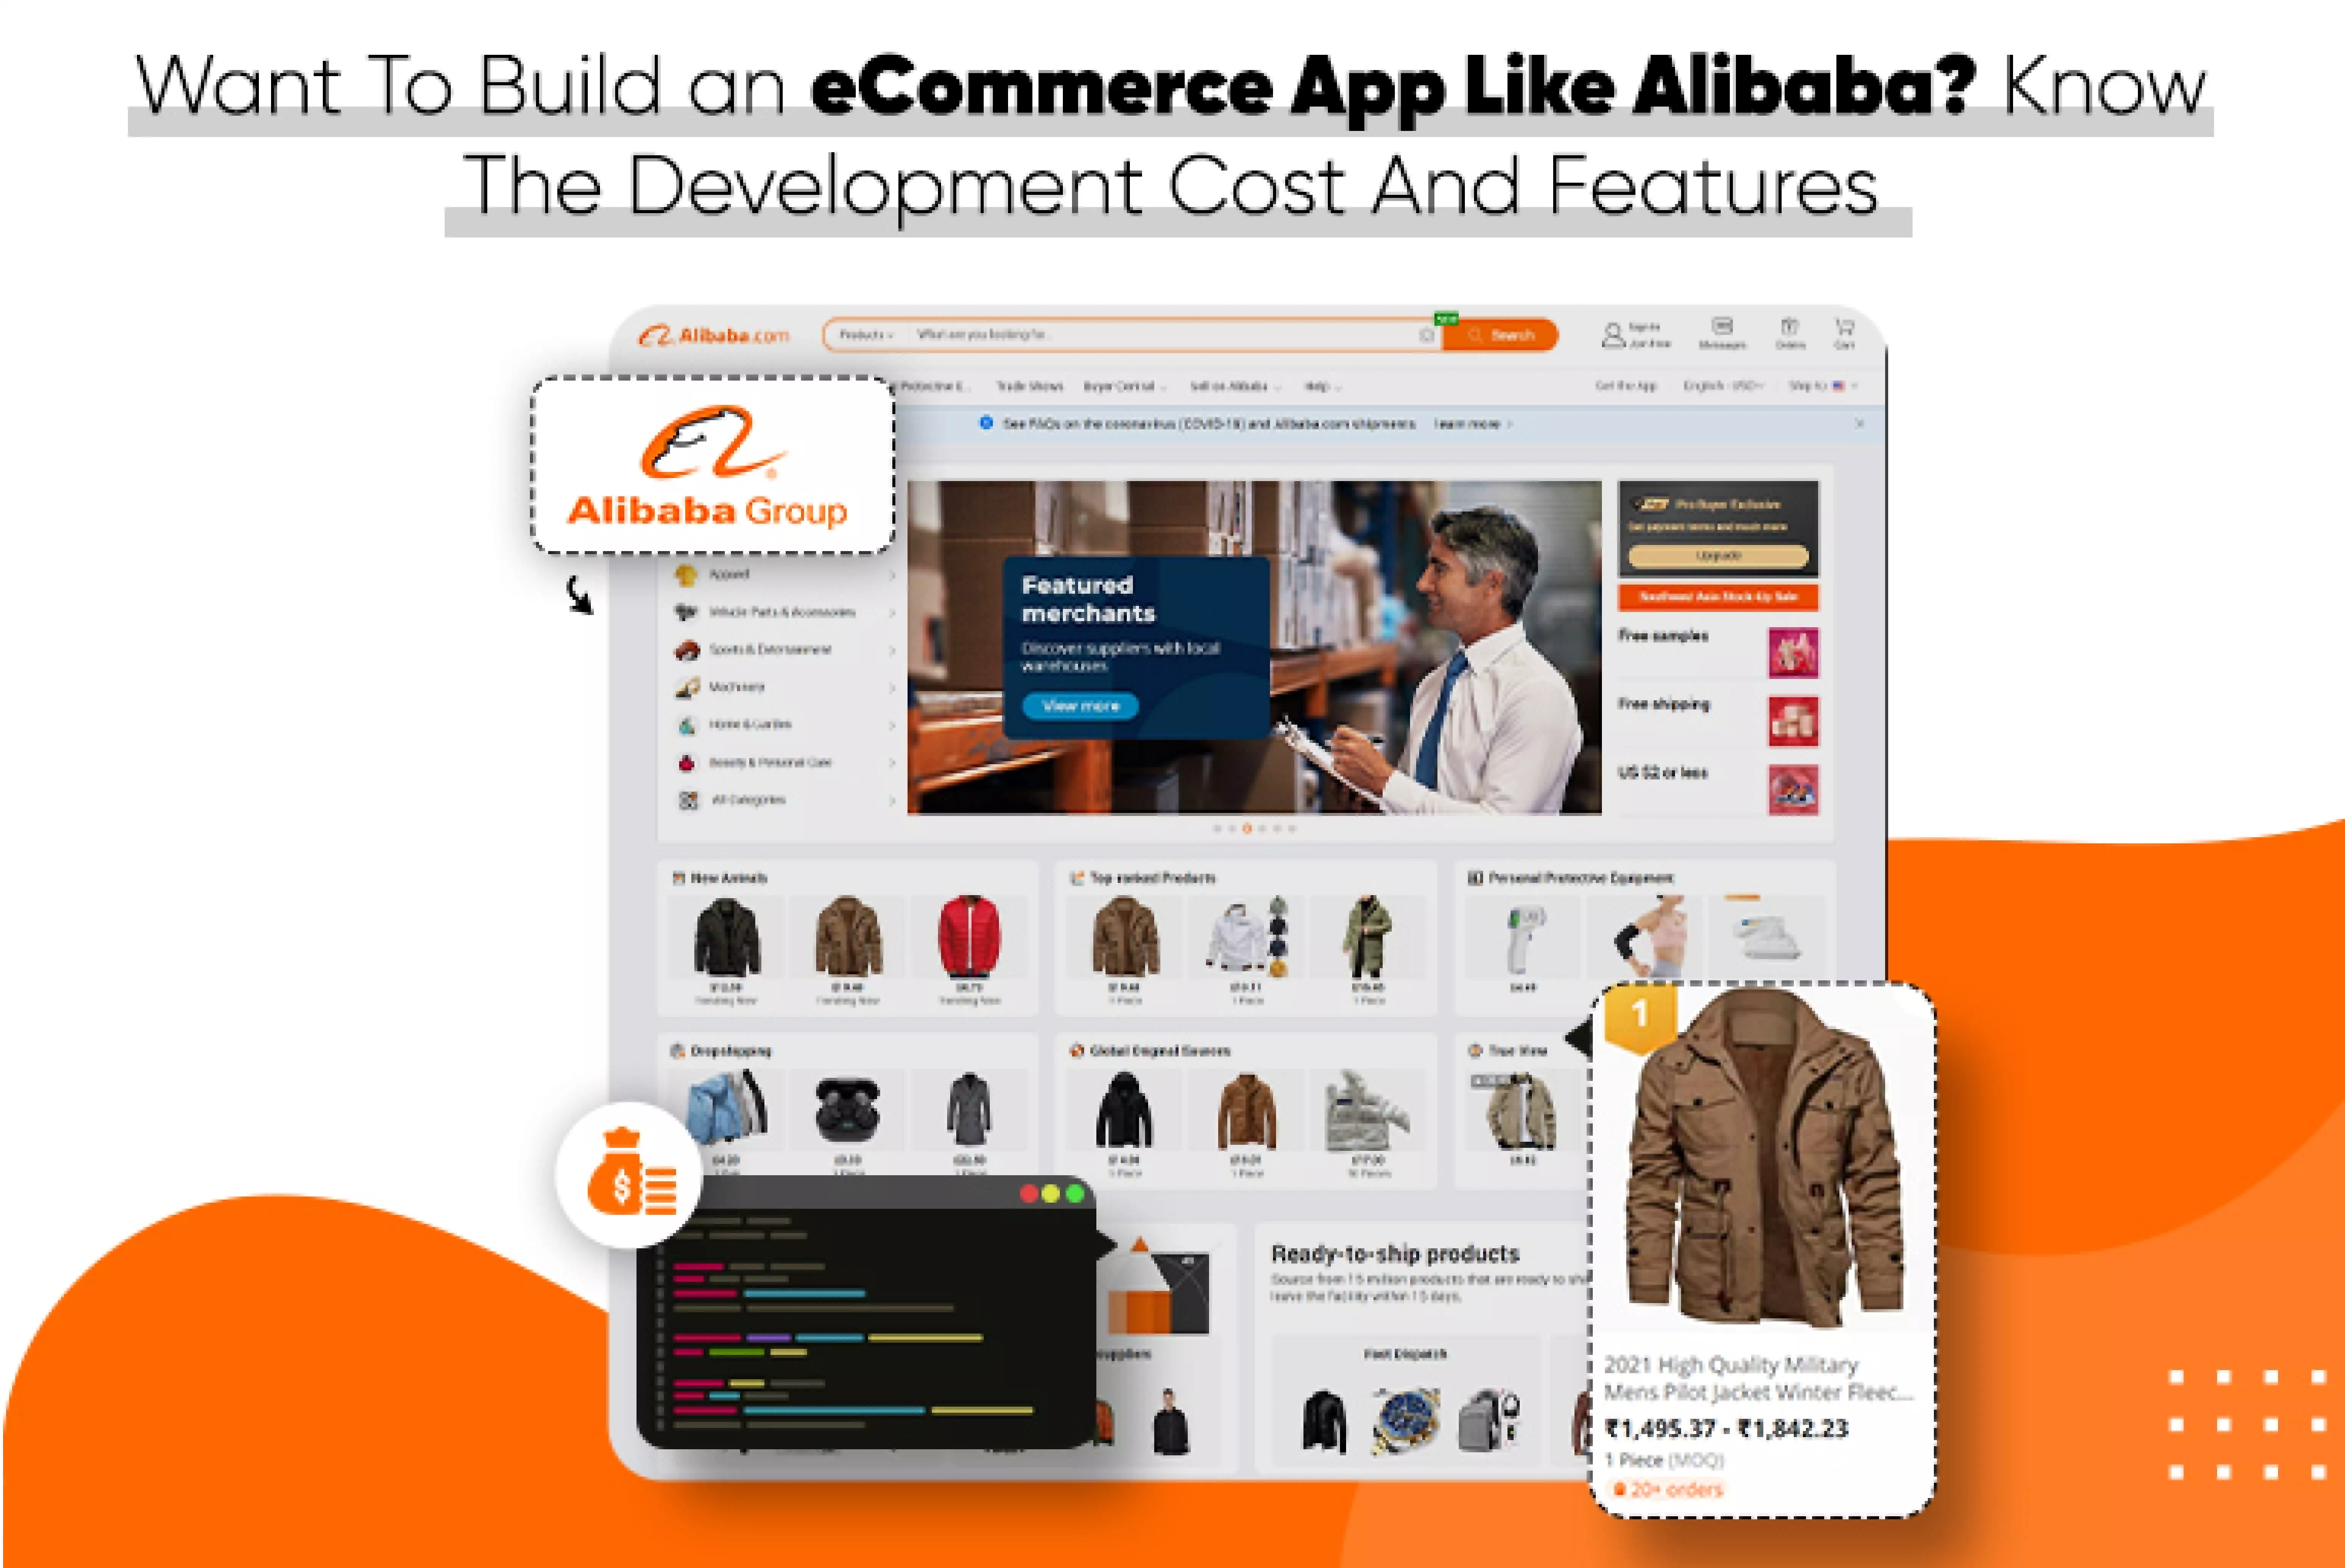 Want To Build an eCommerce App Like Alibaba Know The Development Cost And Features_Thum